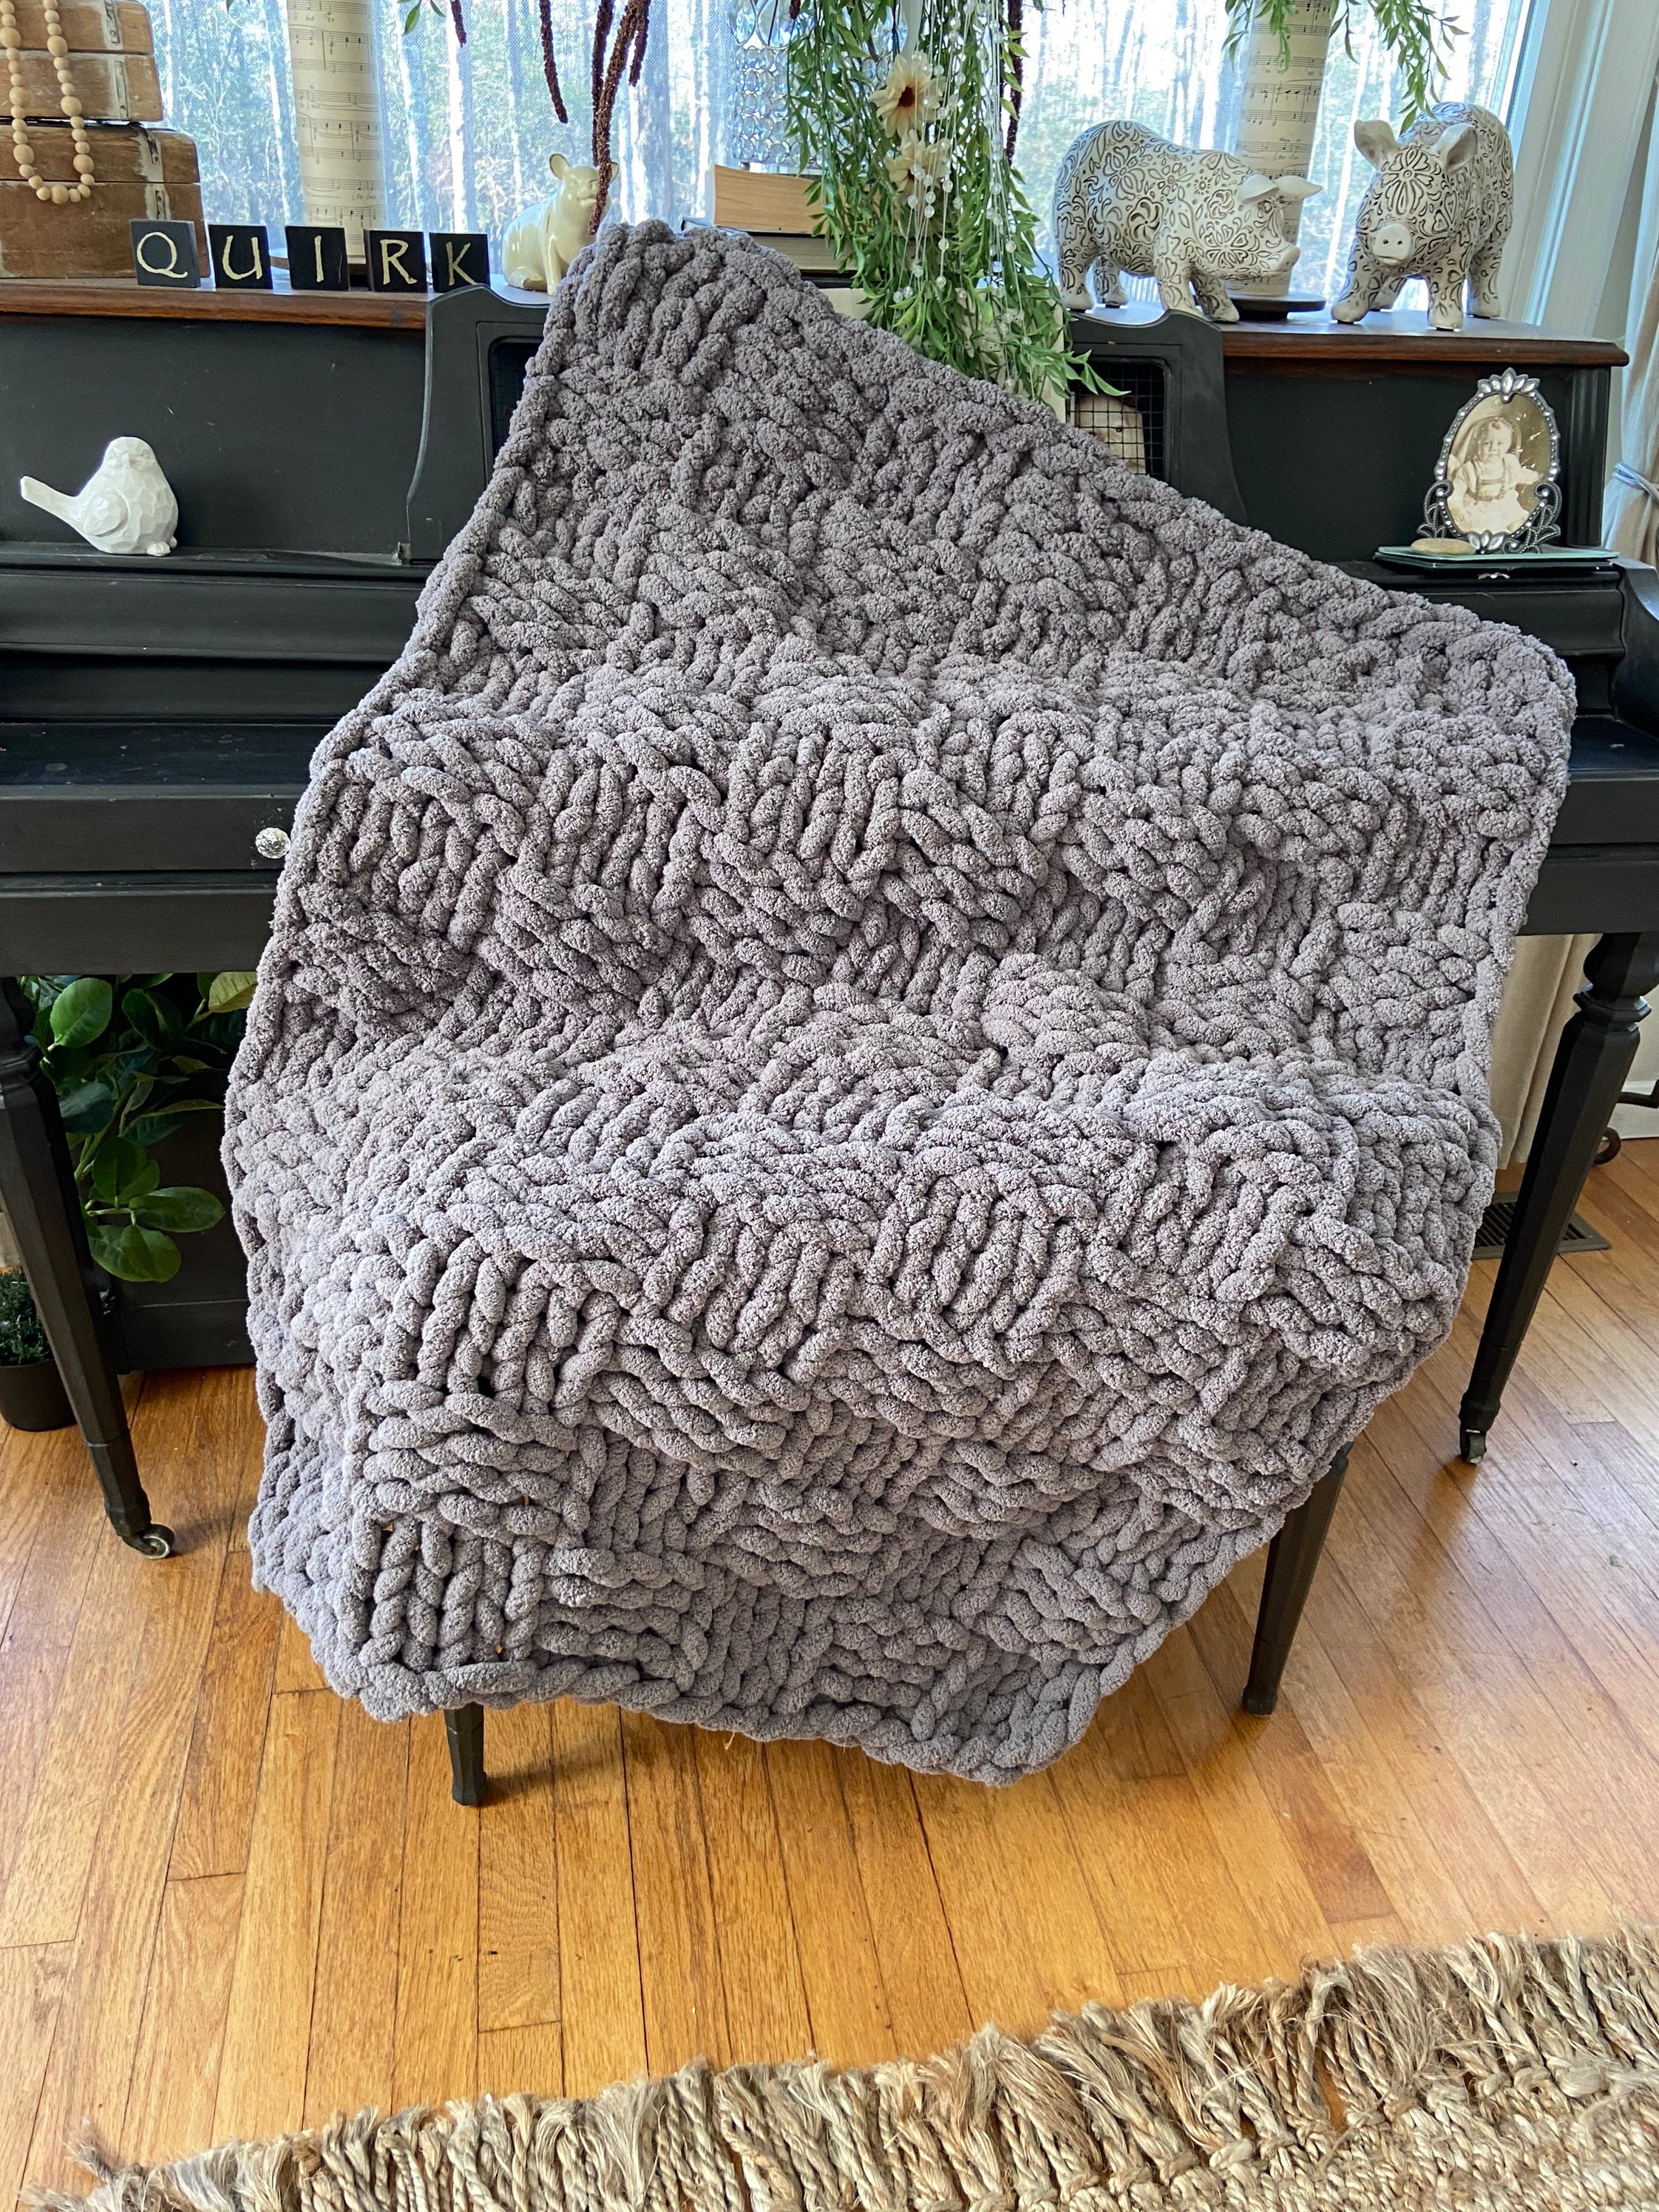 HOW TO HAND KNIT A CHUNKY CHENILLE BLANKET, BASKET WEAVE PATTERN 